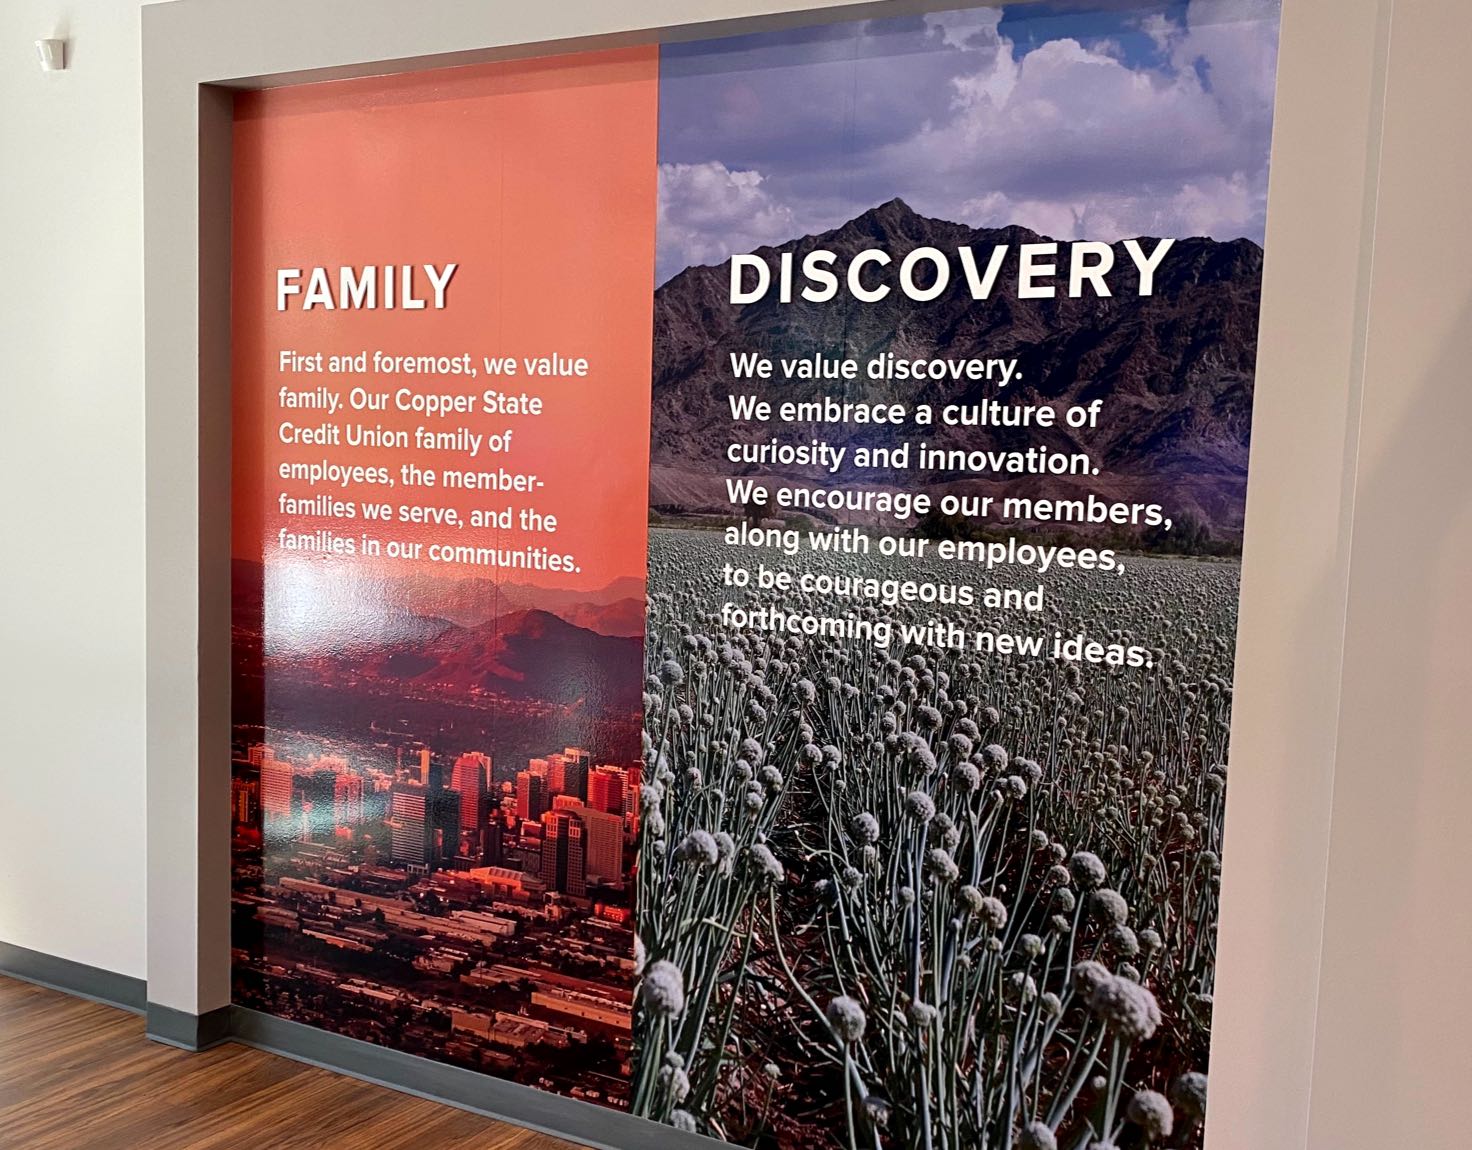 A wall displaying two murals about "Family" and "Discovery".